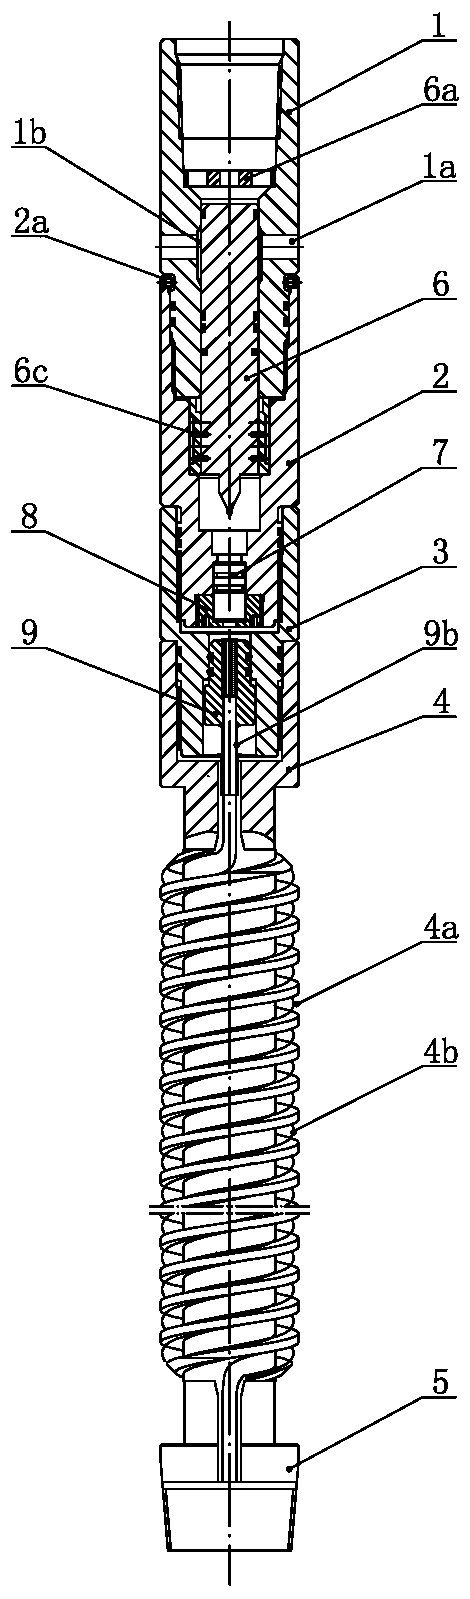 Well-drilling redressing and reaming device